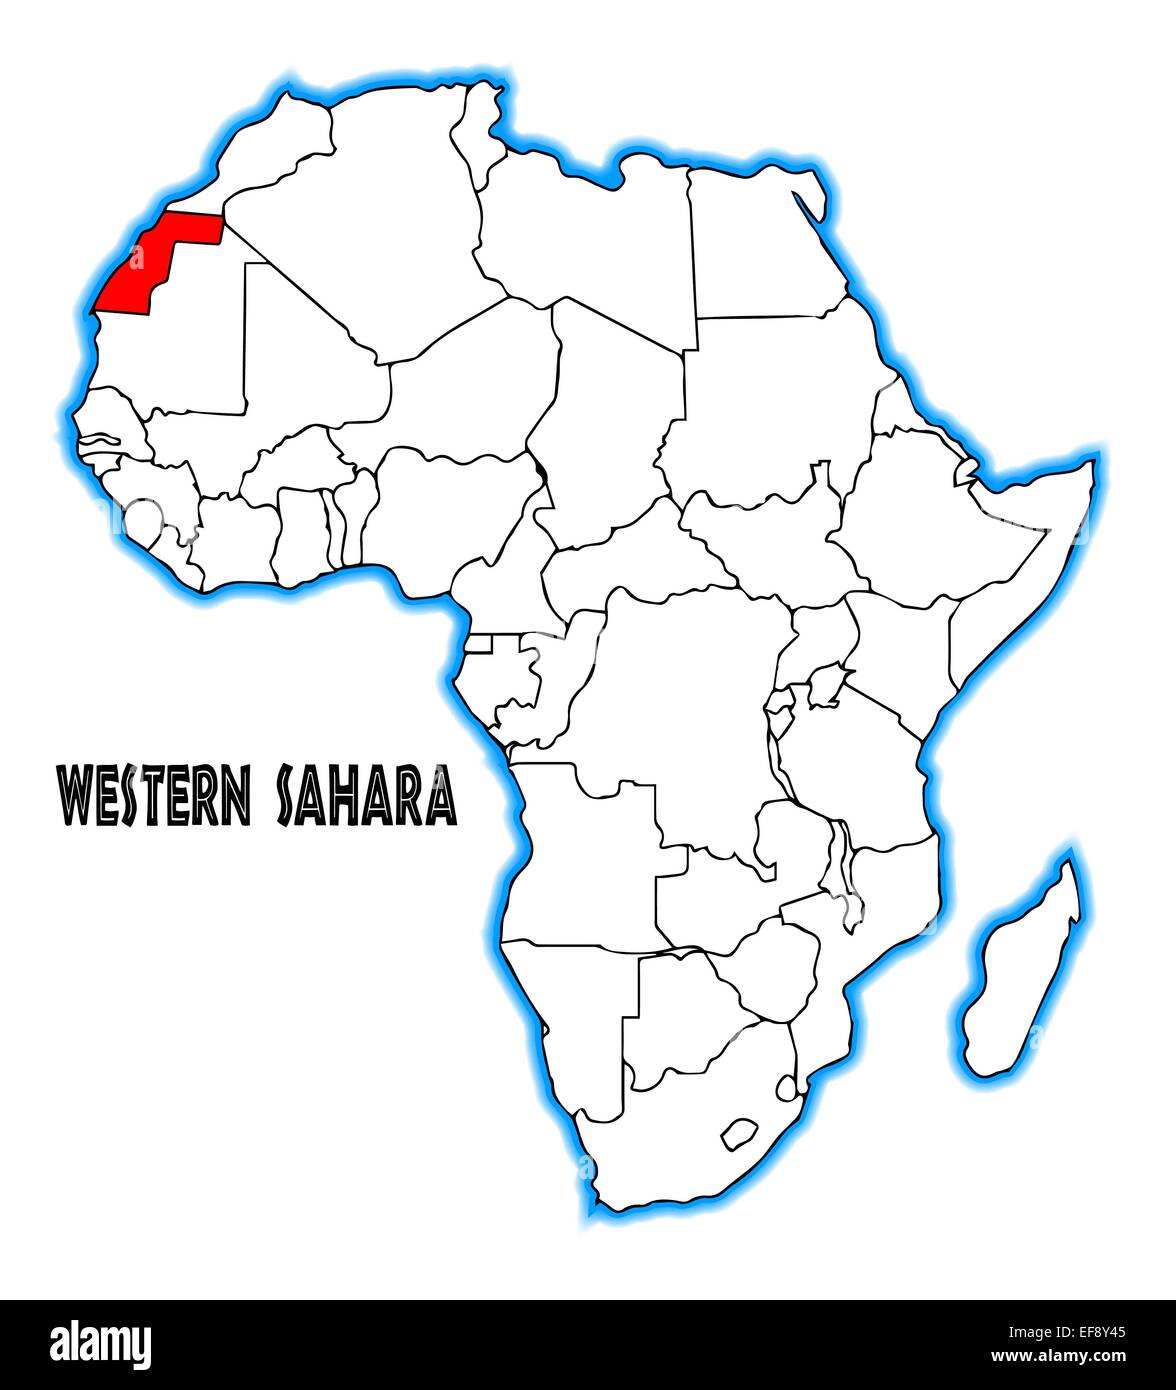 Western Sahara outline inset into a map of Africa over a white background  Stock Photo - Alamy